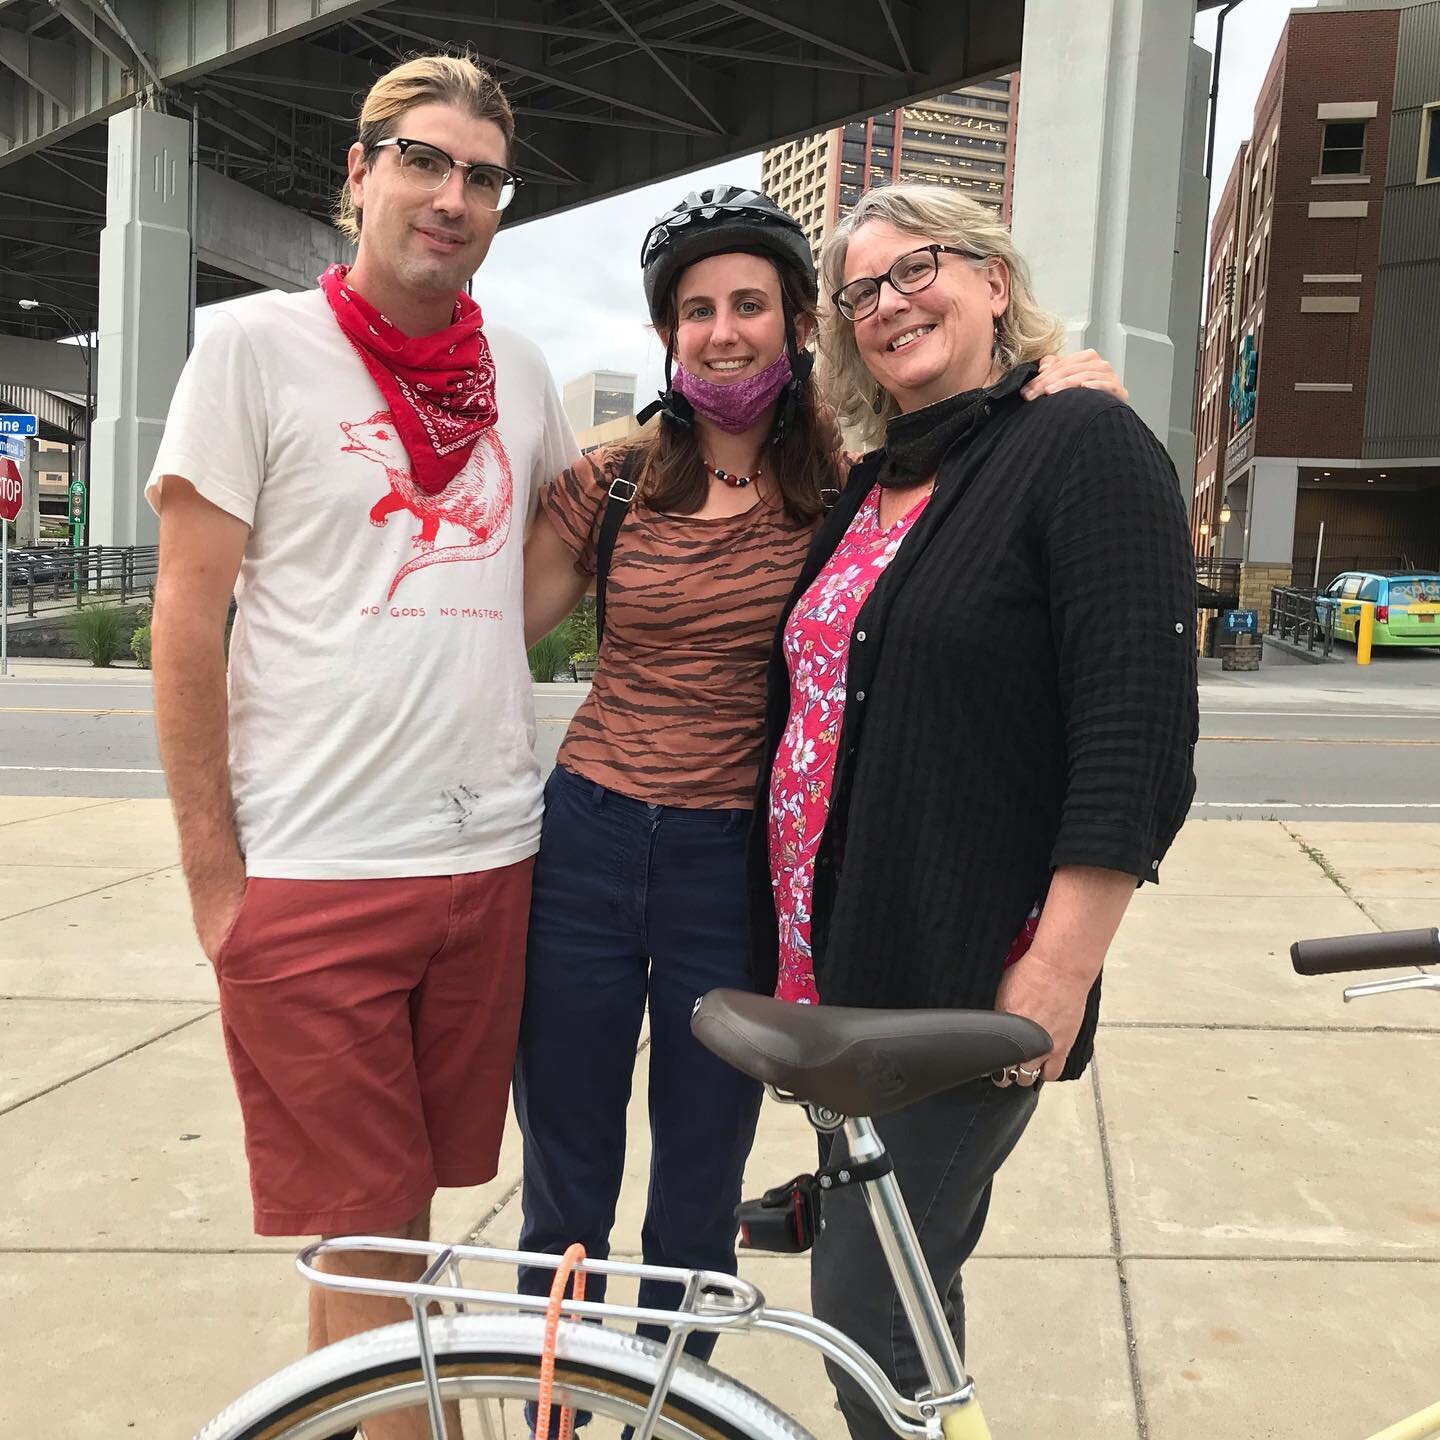 Buffalo is perfect for exploring by bike